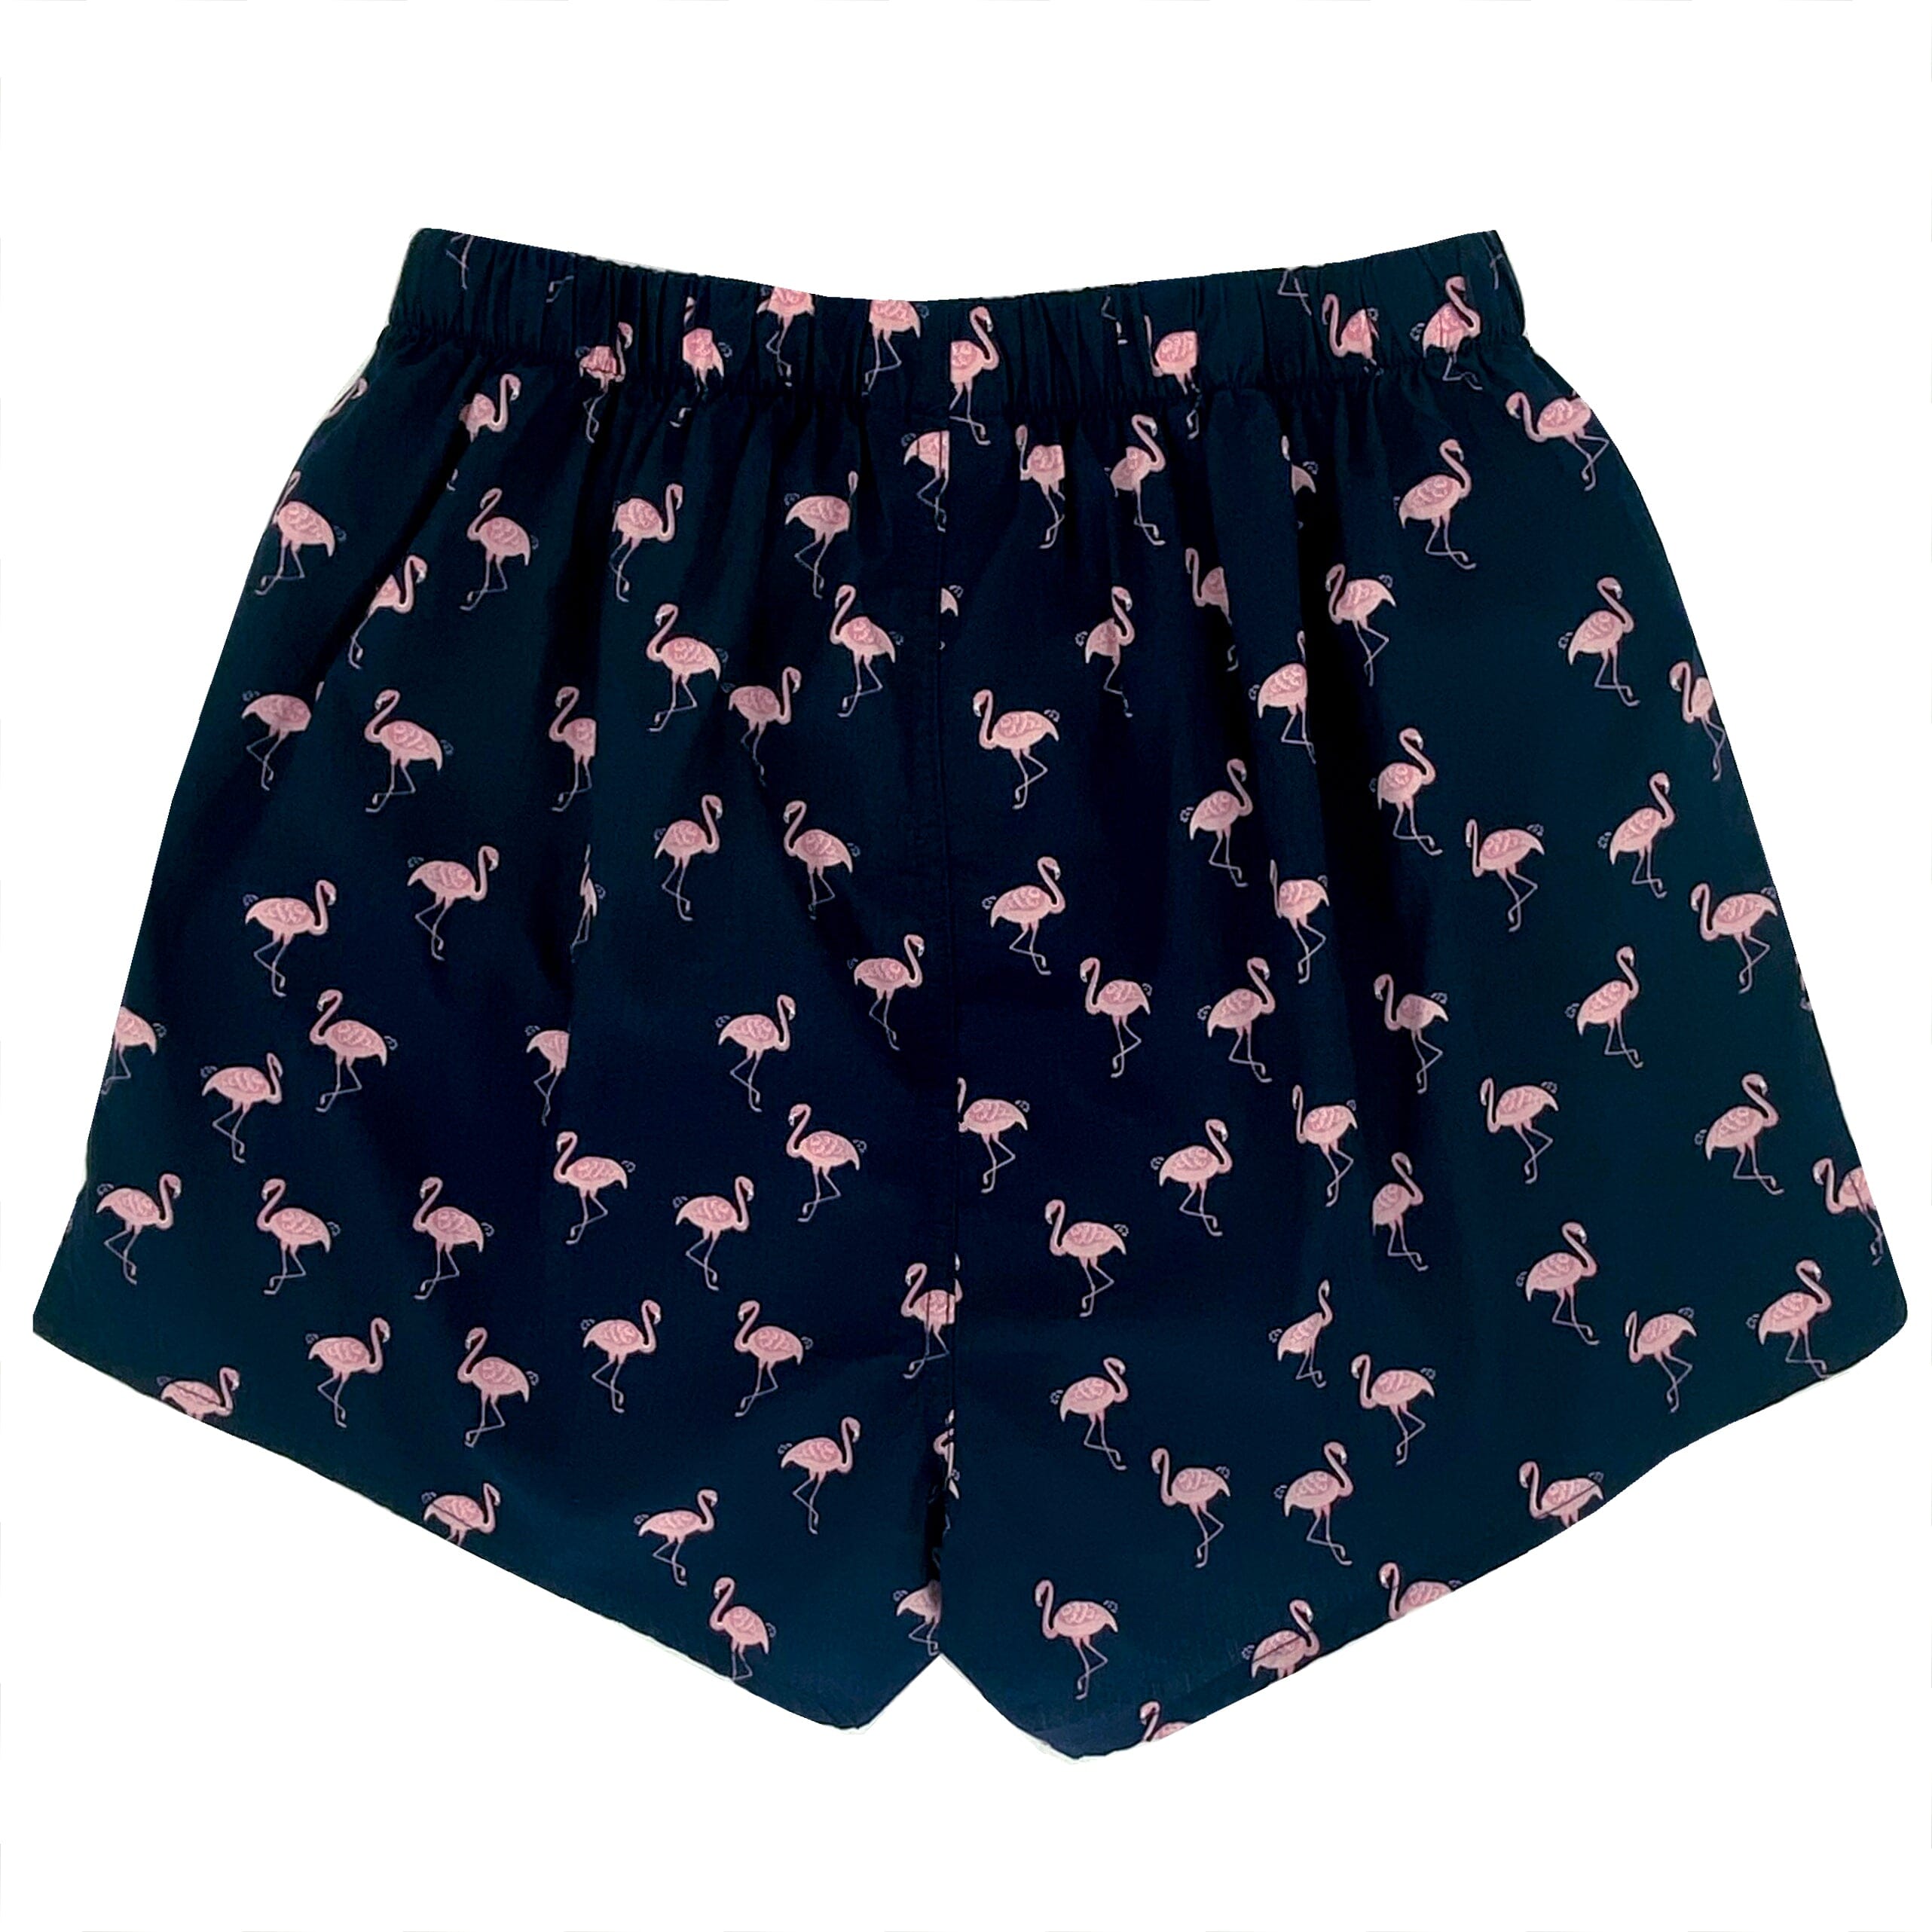 Men's Flamingo All Over Novelty Print Boxer Shorts Underwear in Blue